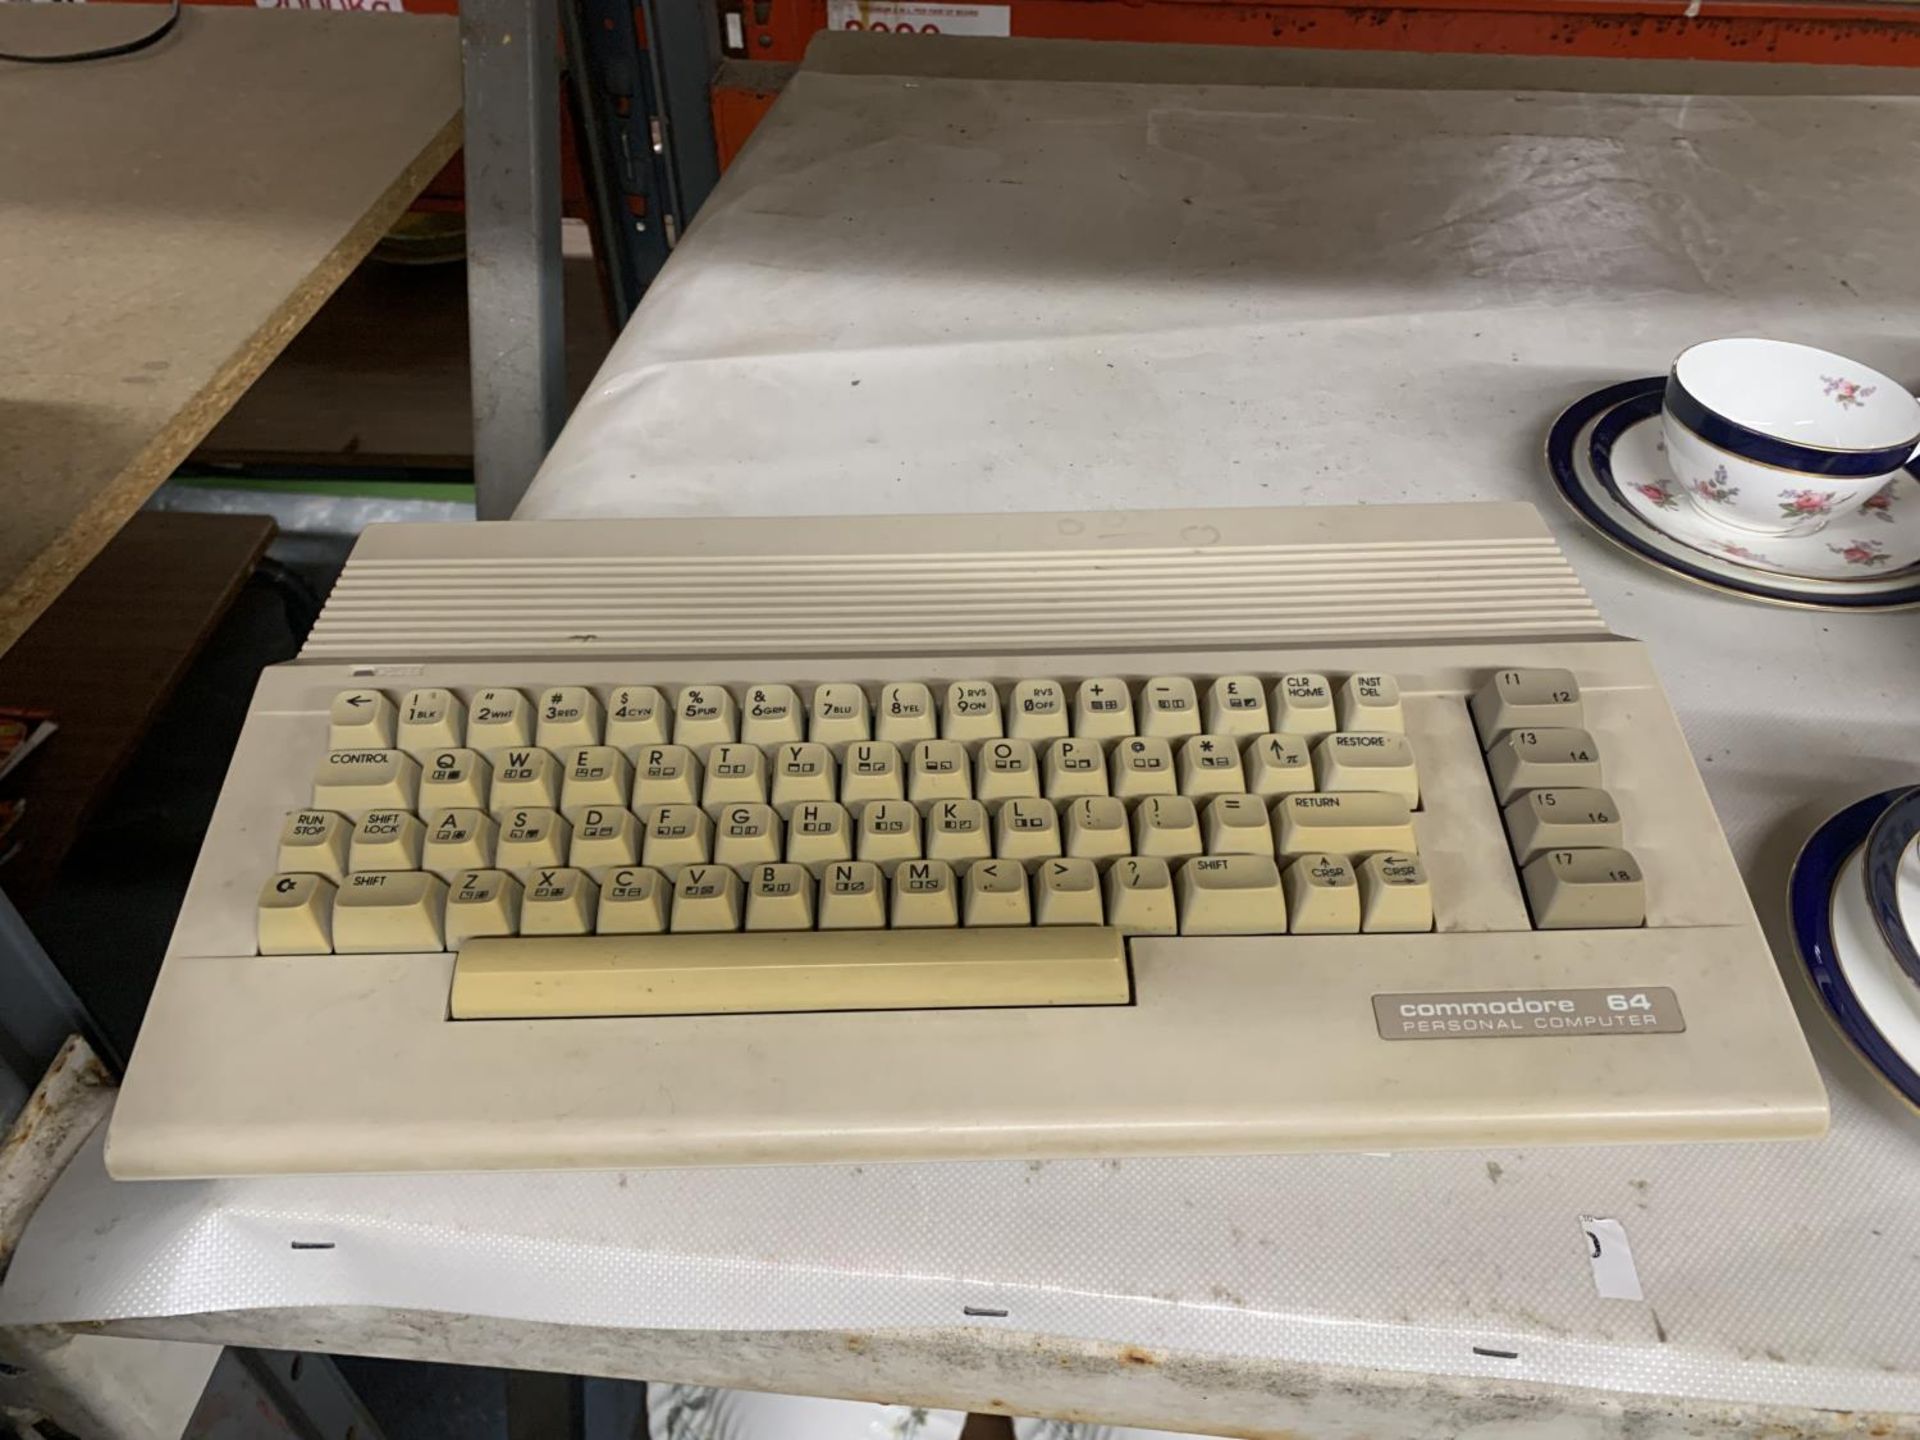 A COMMODORE 64 PERSONAL COMPUTER - Image 3 of 3